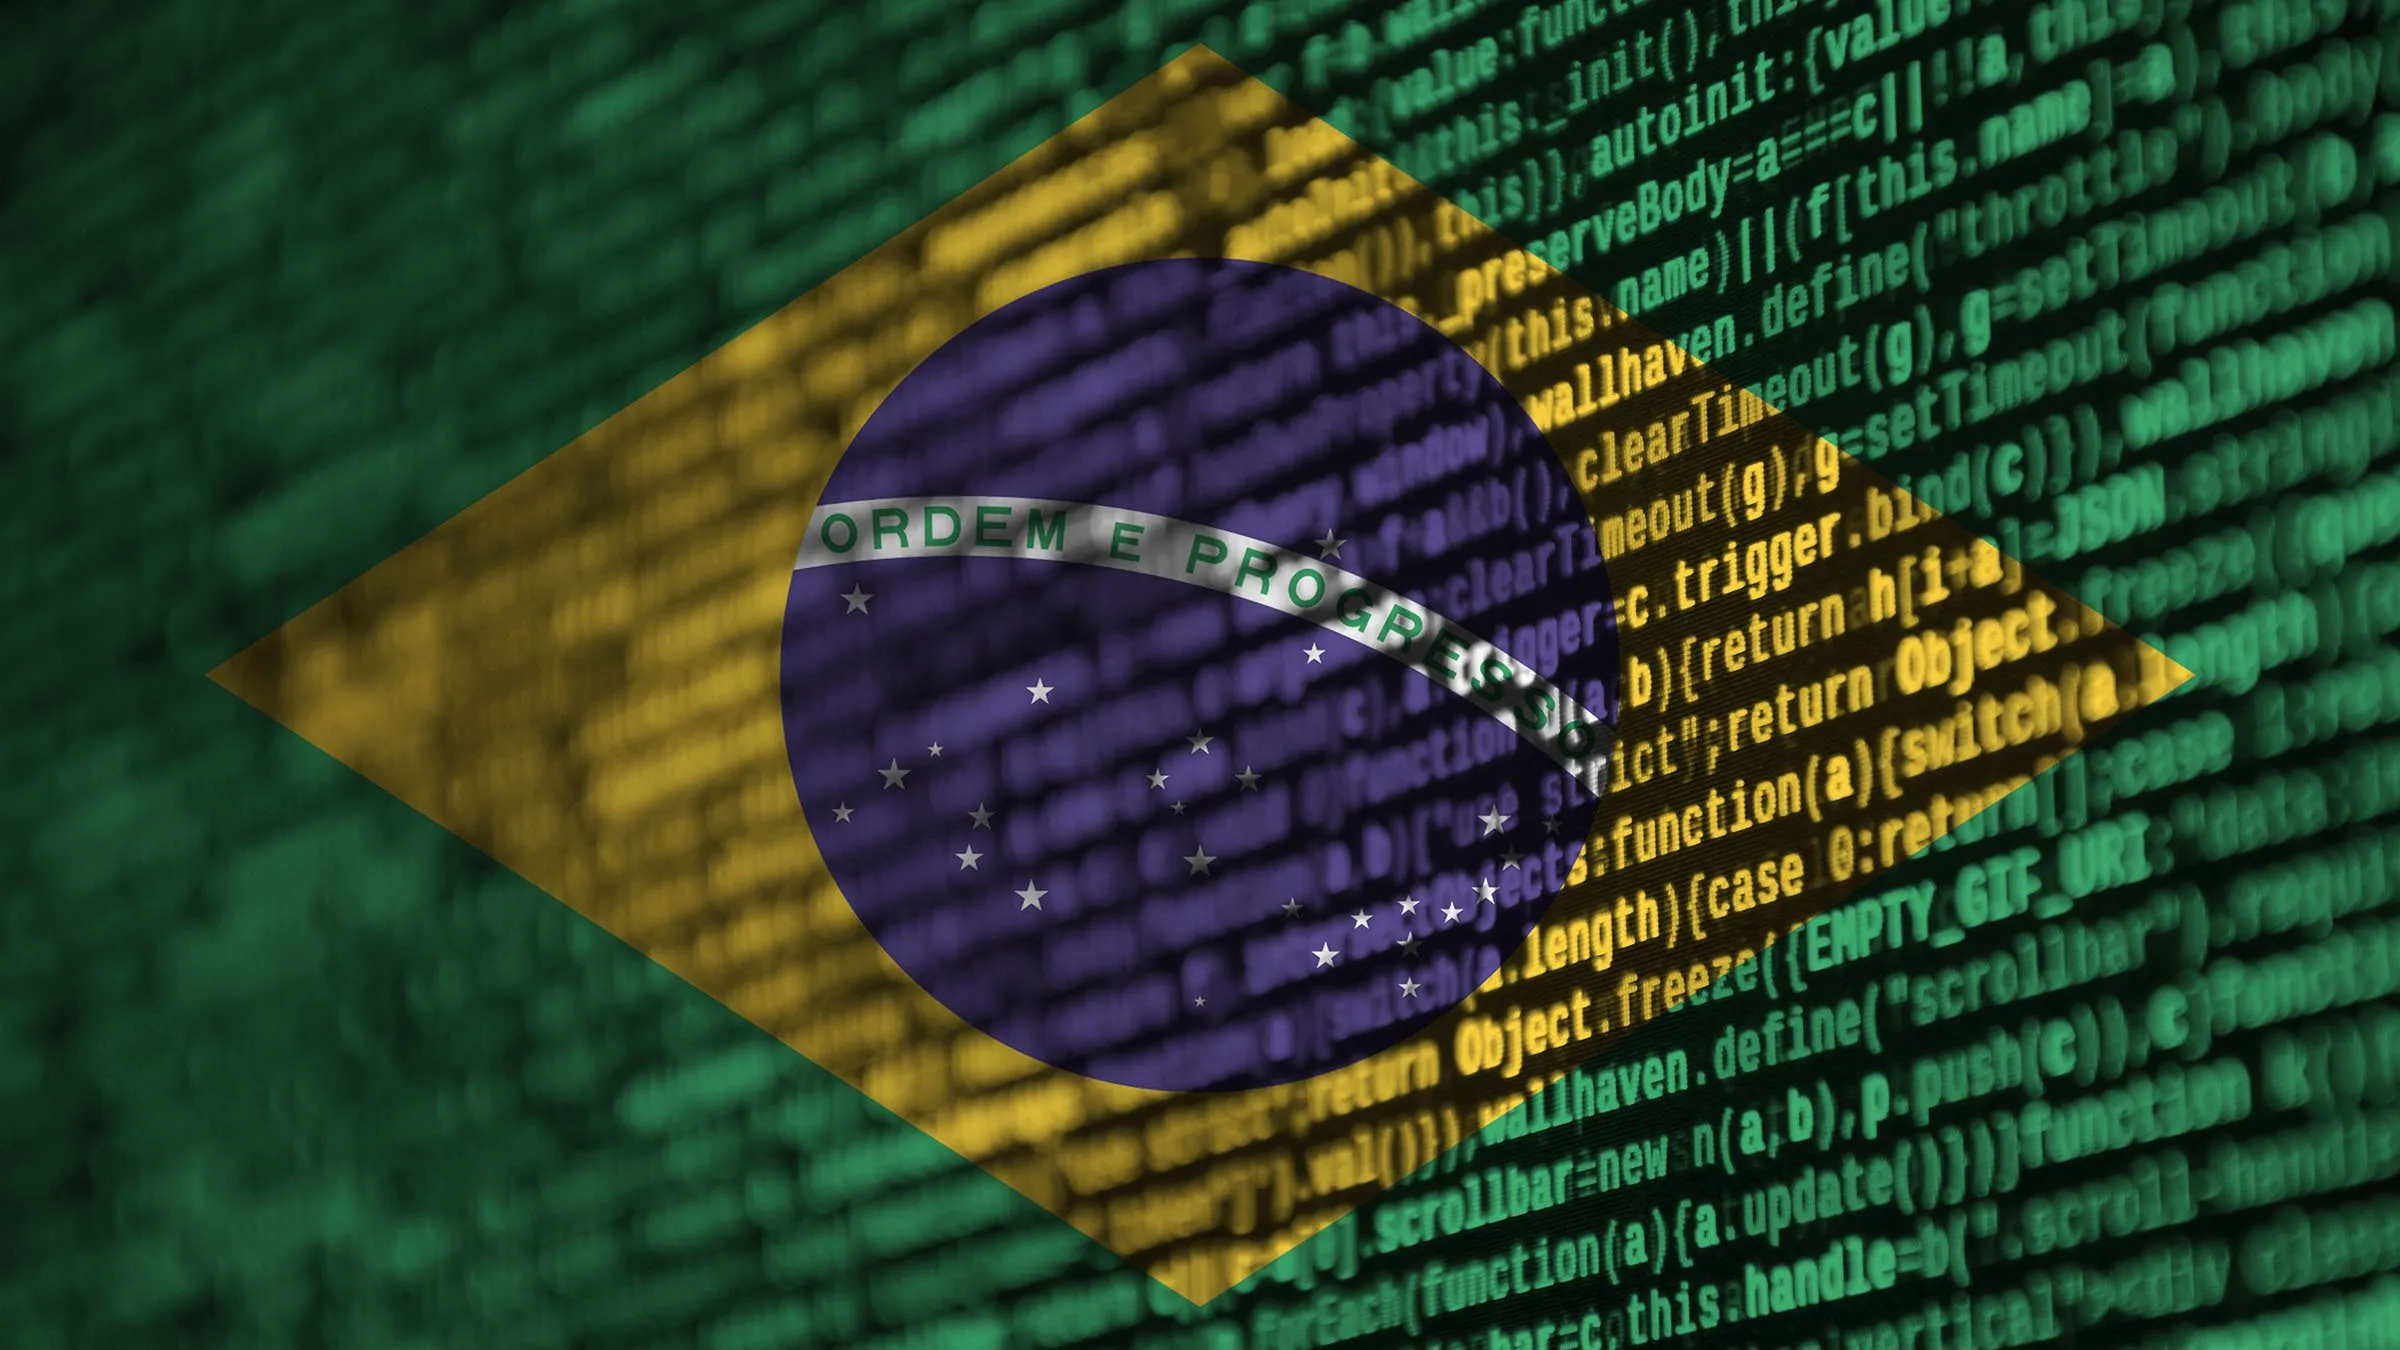 Brazil has its eyes on crypto. Image: Shutterstock